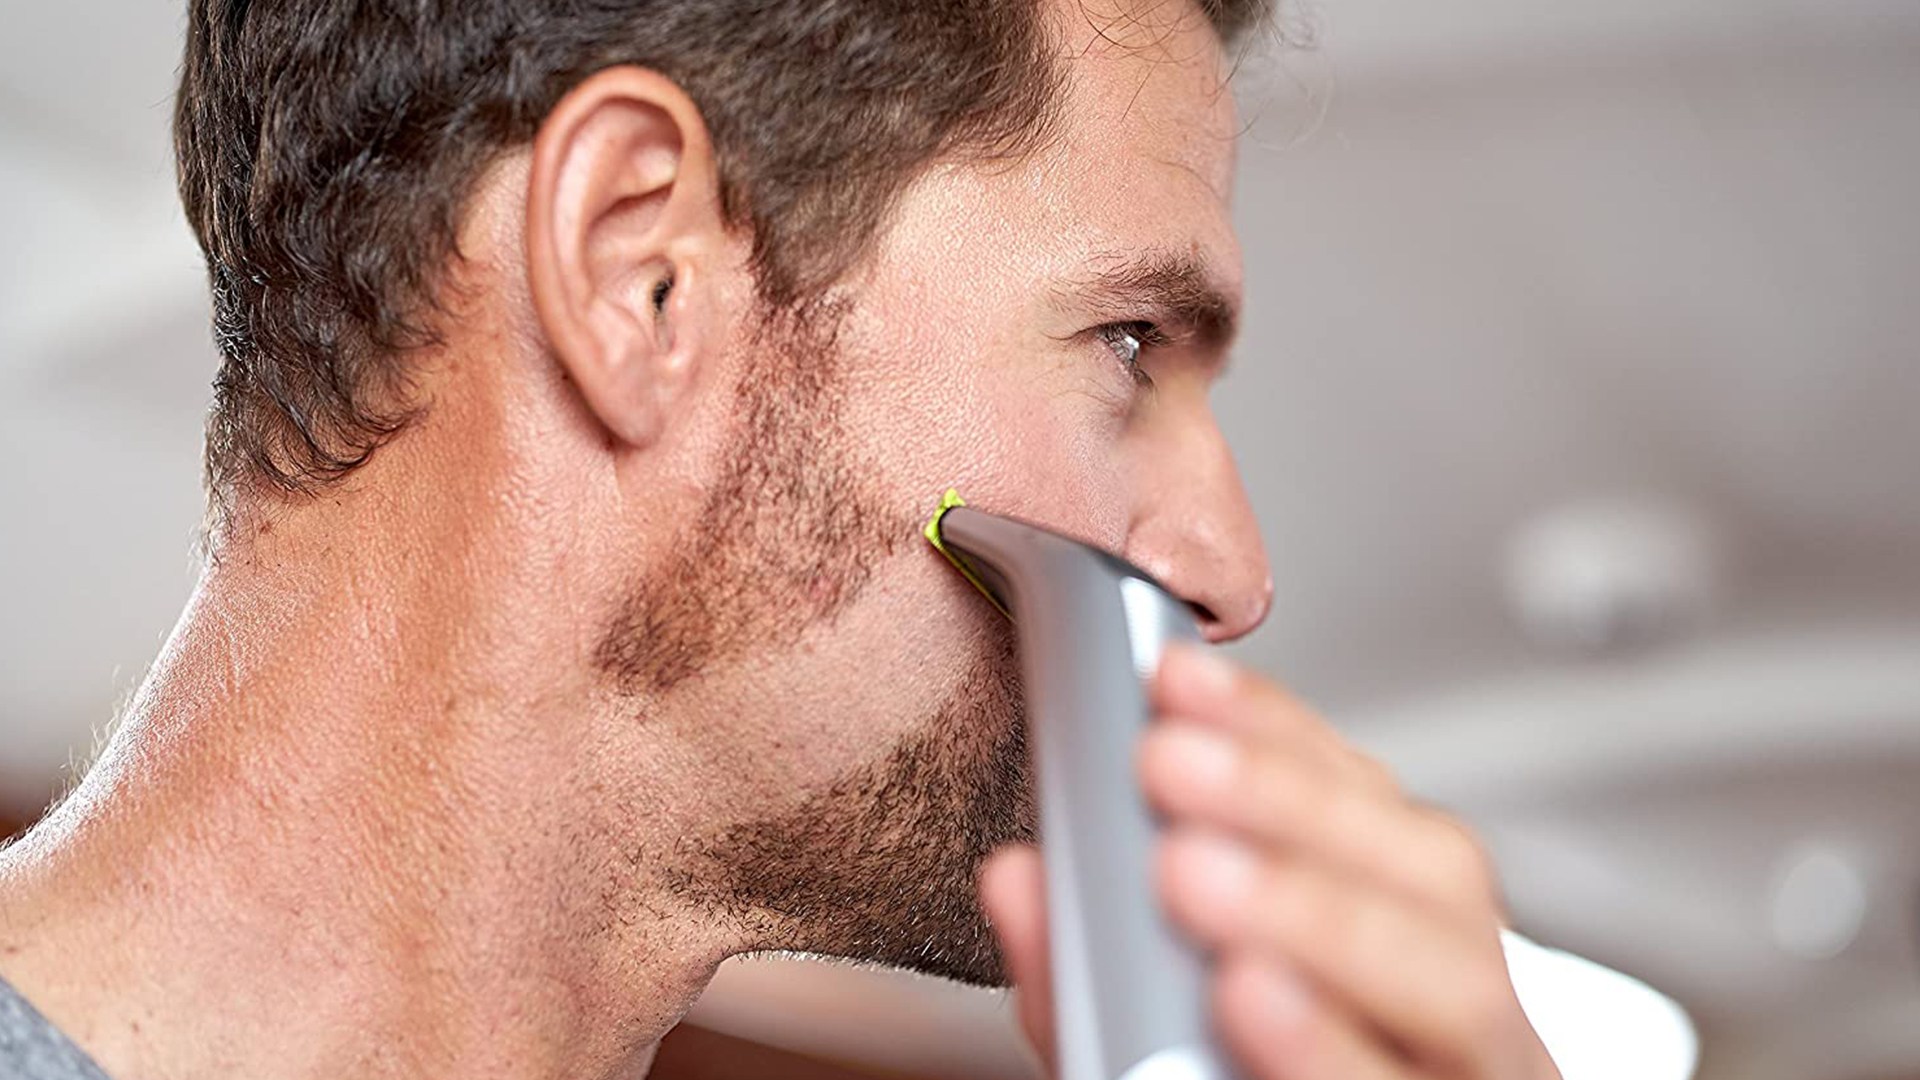 Philips Norelco OneBlade Review: An Electric Shaver with Disposable Blades